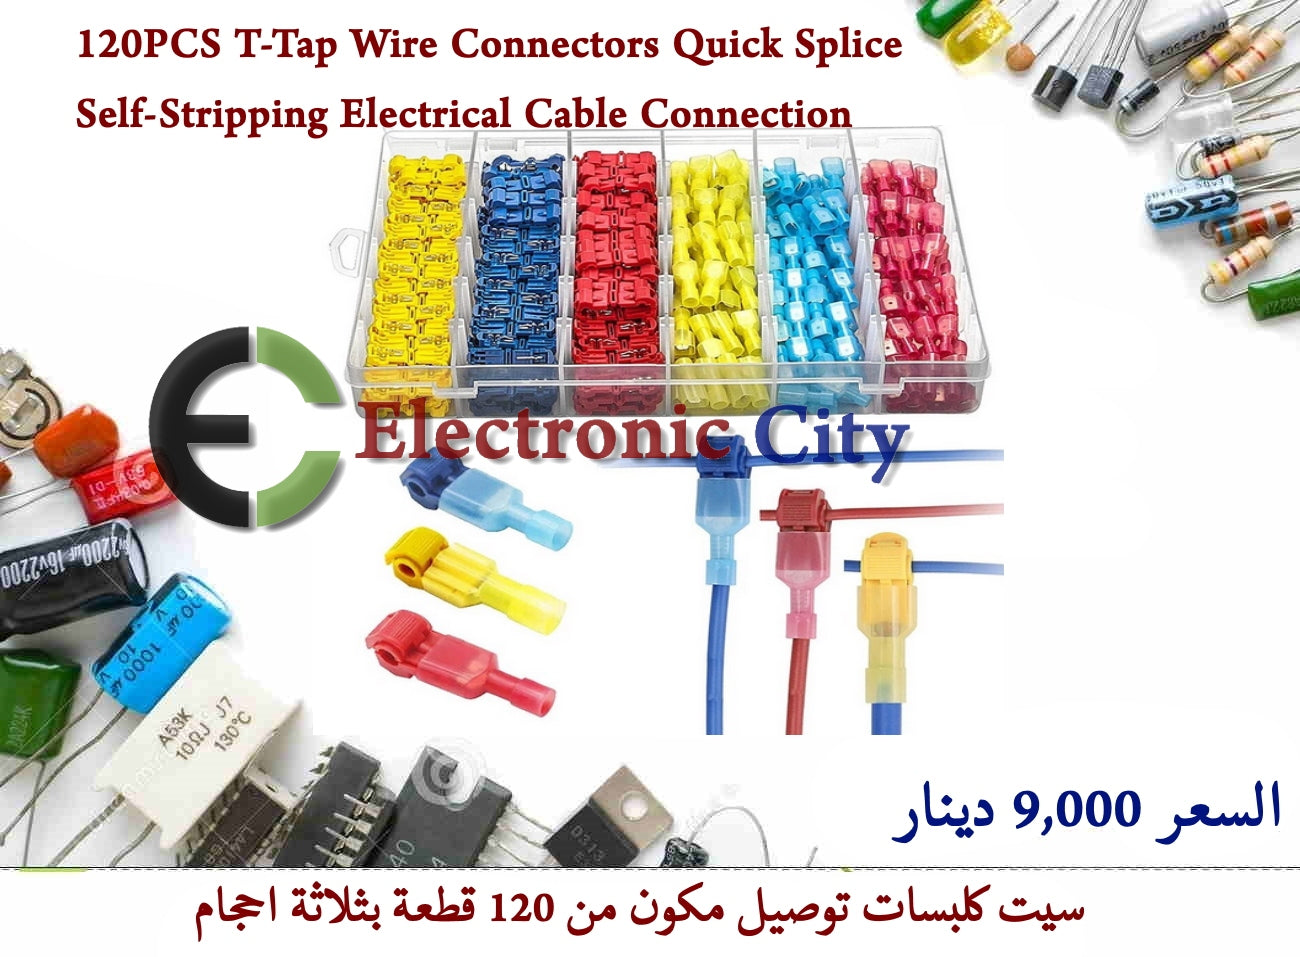 120PCS T-Tap Wire Connectors Quick Splice Self-Stripping Electrical Cable Connection